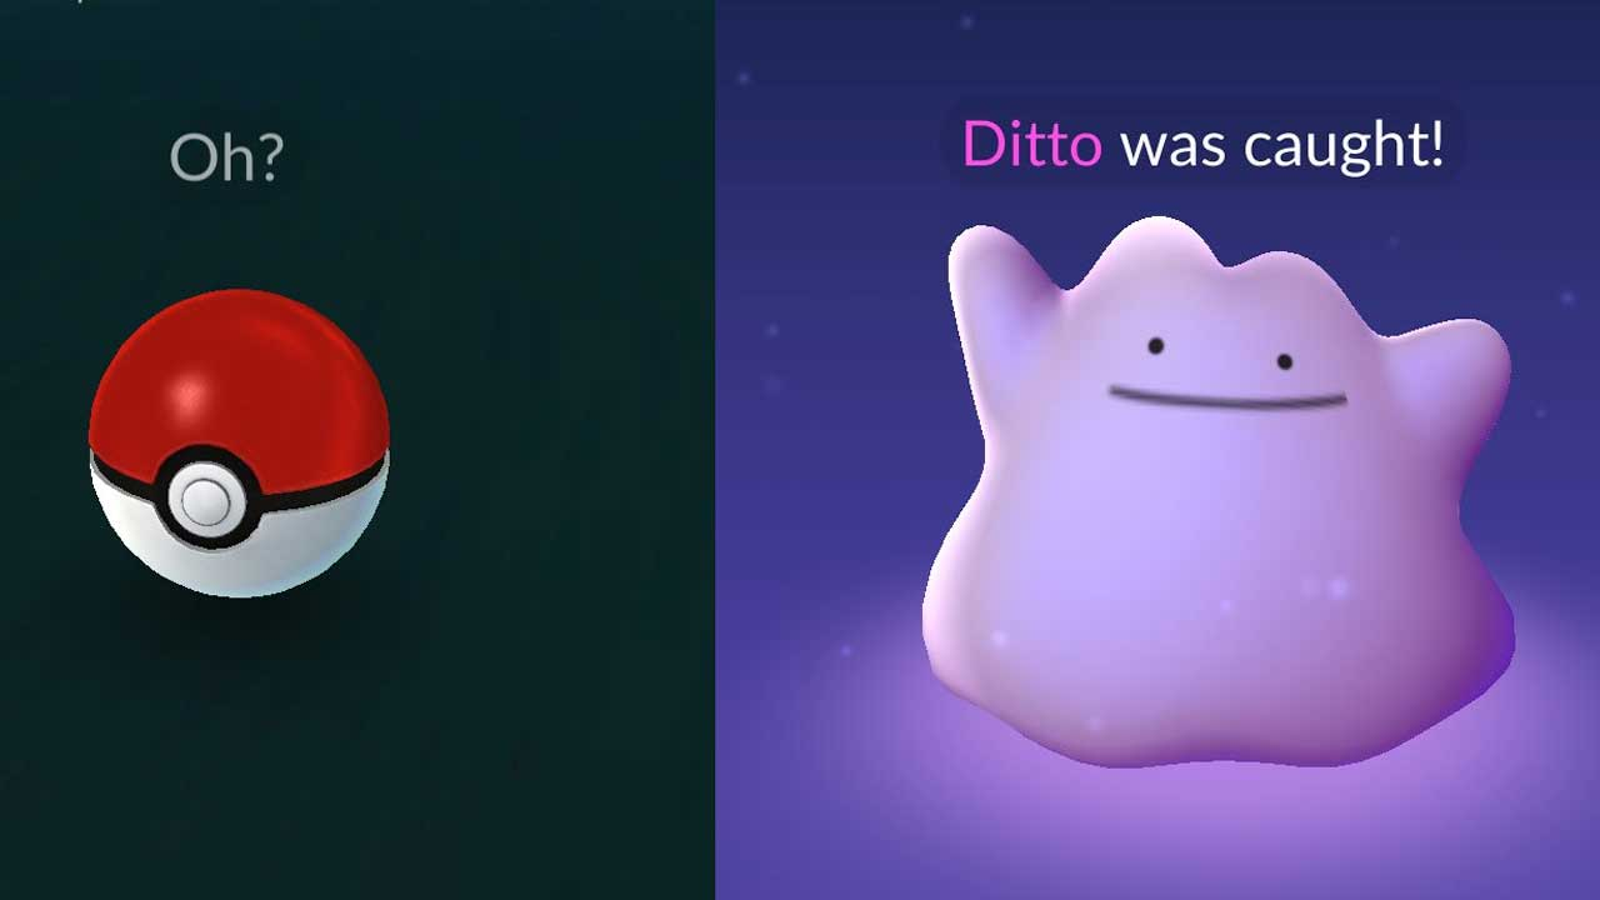 Pokemon Go Ditto guide How to catch a Ditto in Pokemon Go on Apple Books